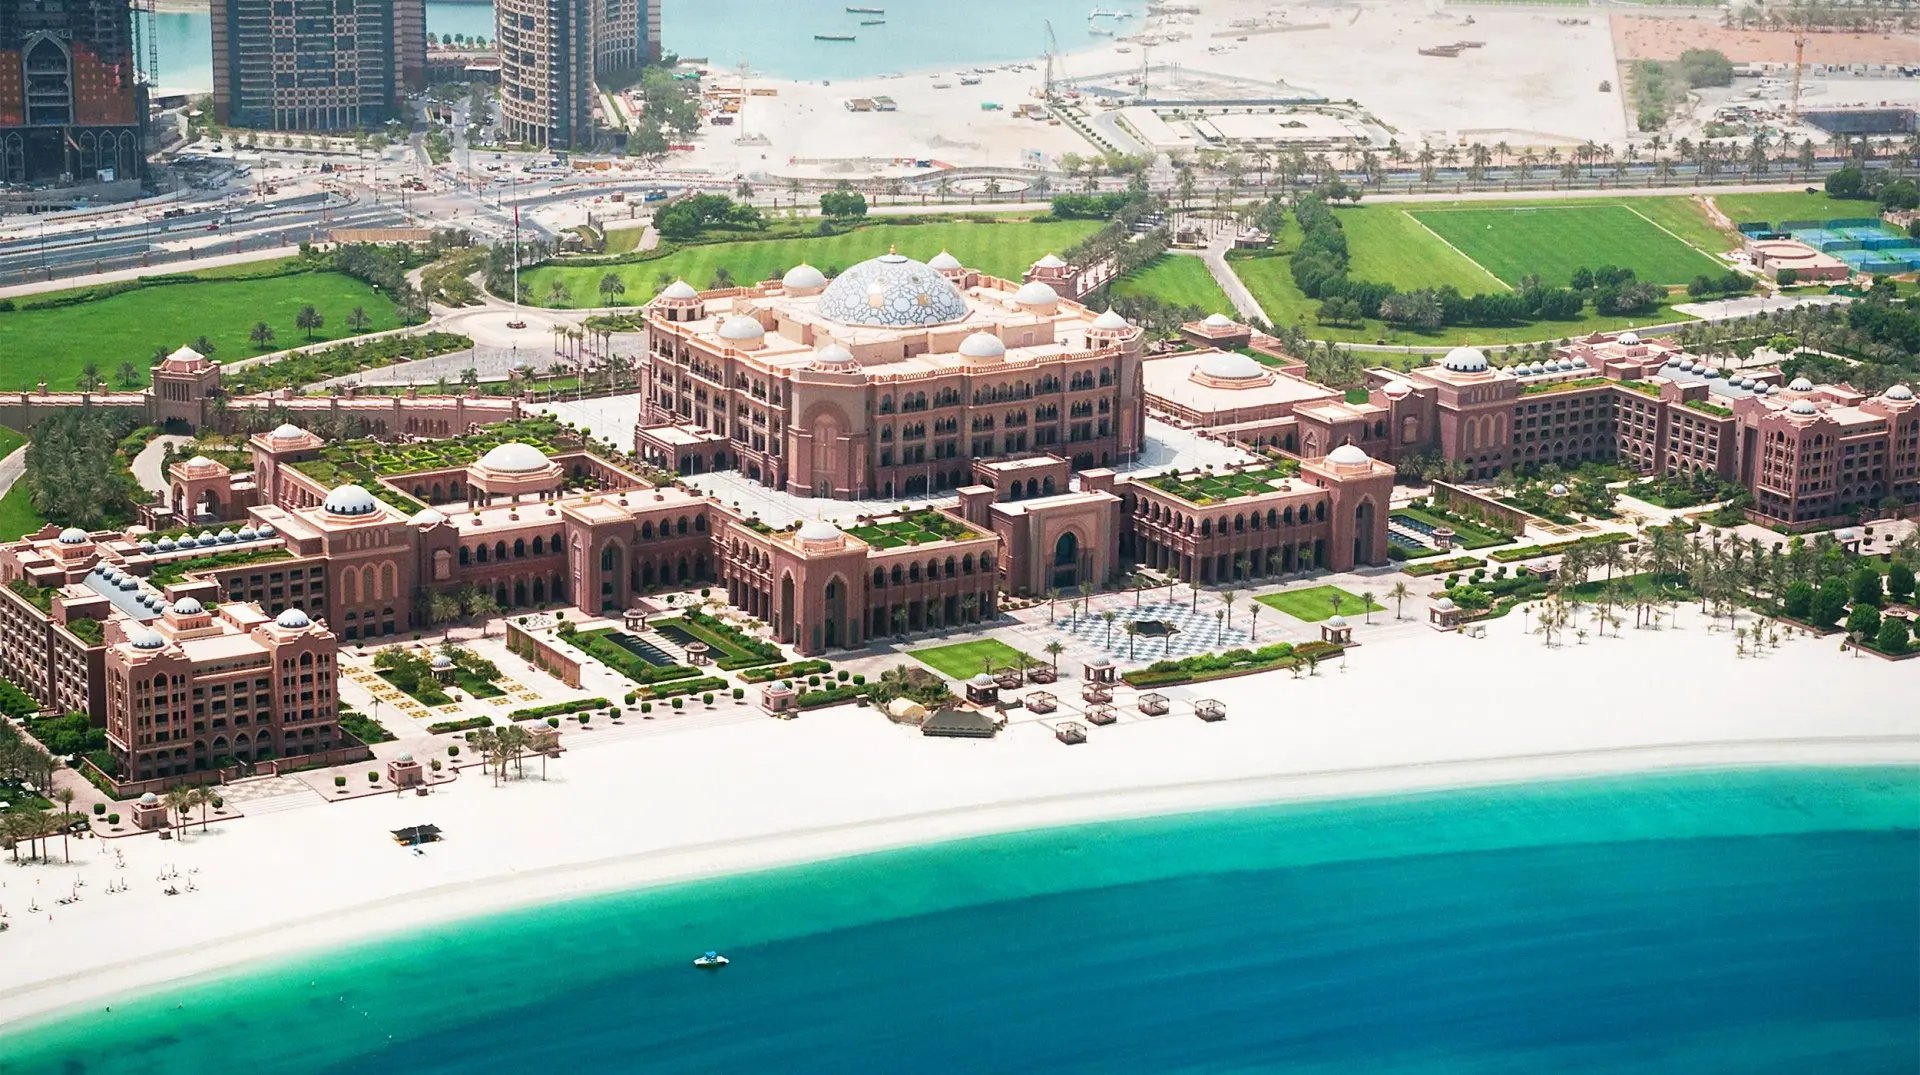 Hotel review Location' - Emirates Palace Hotel - 0